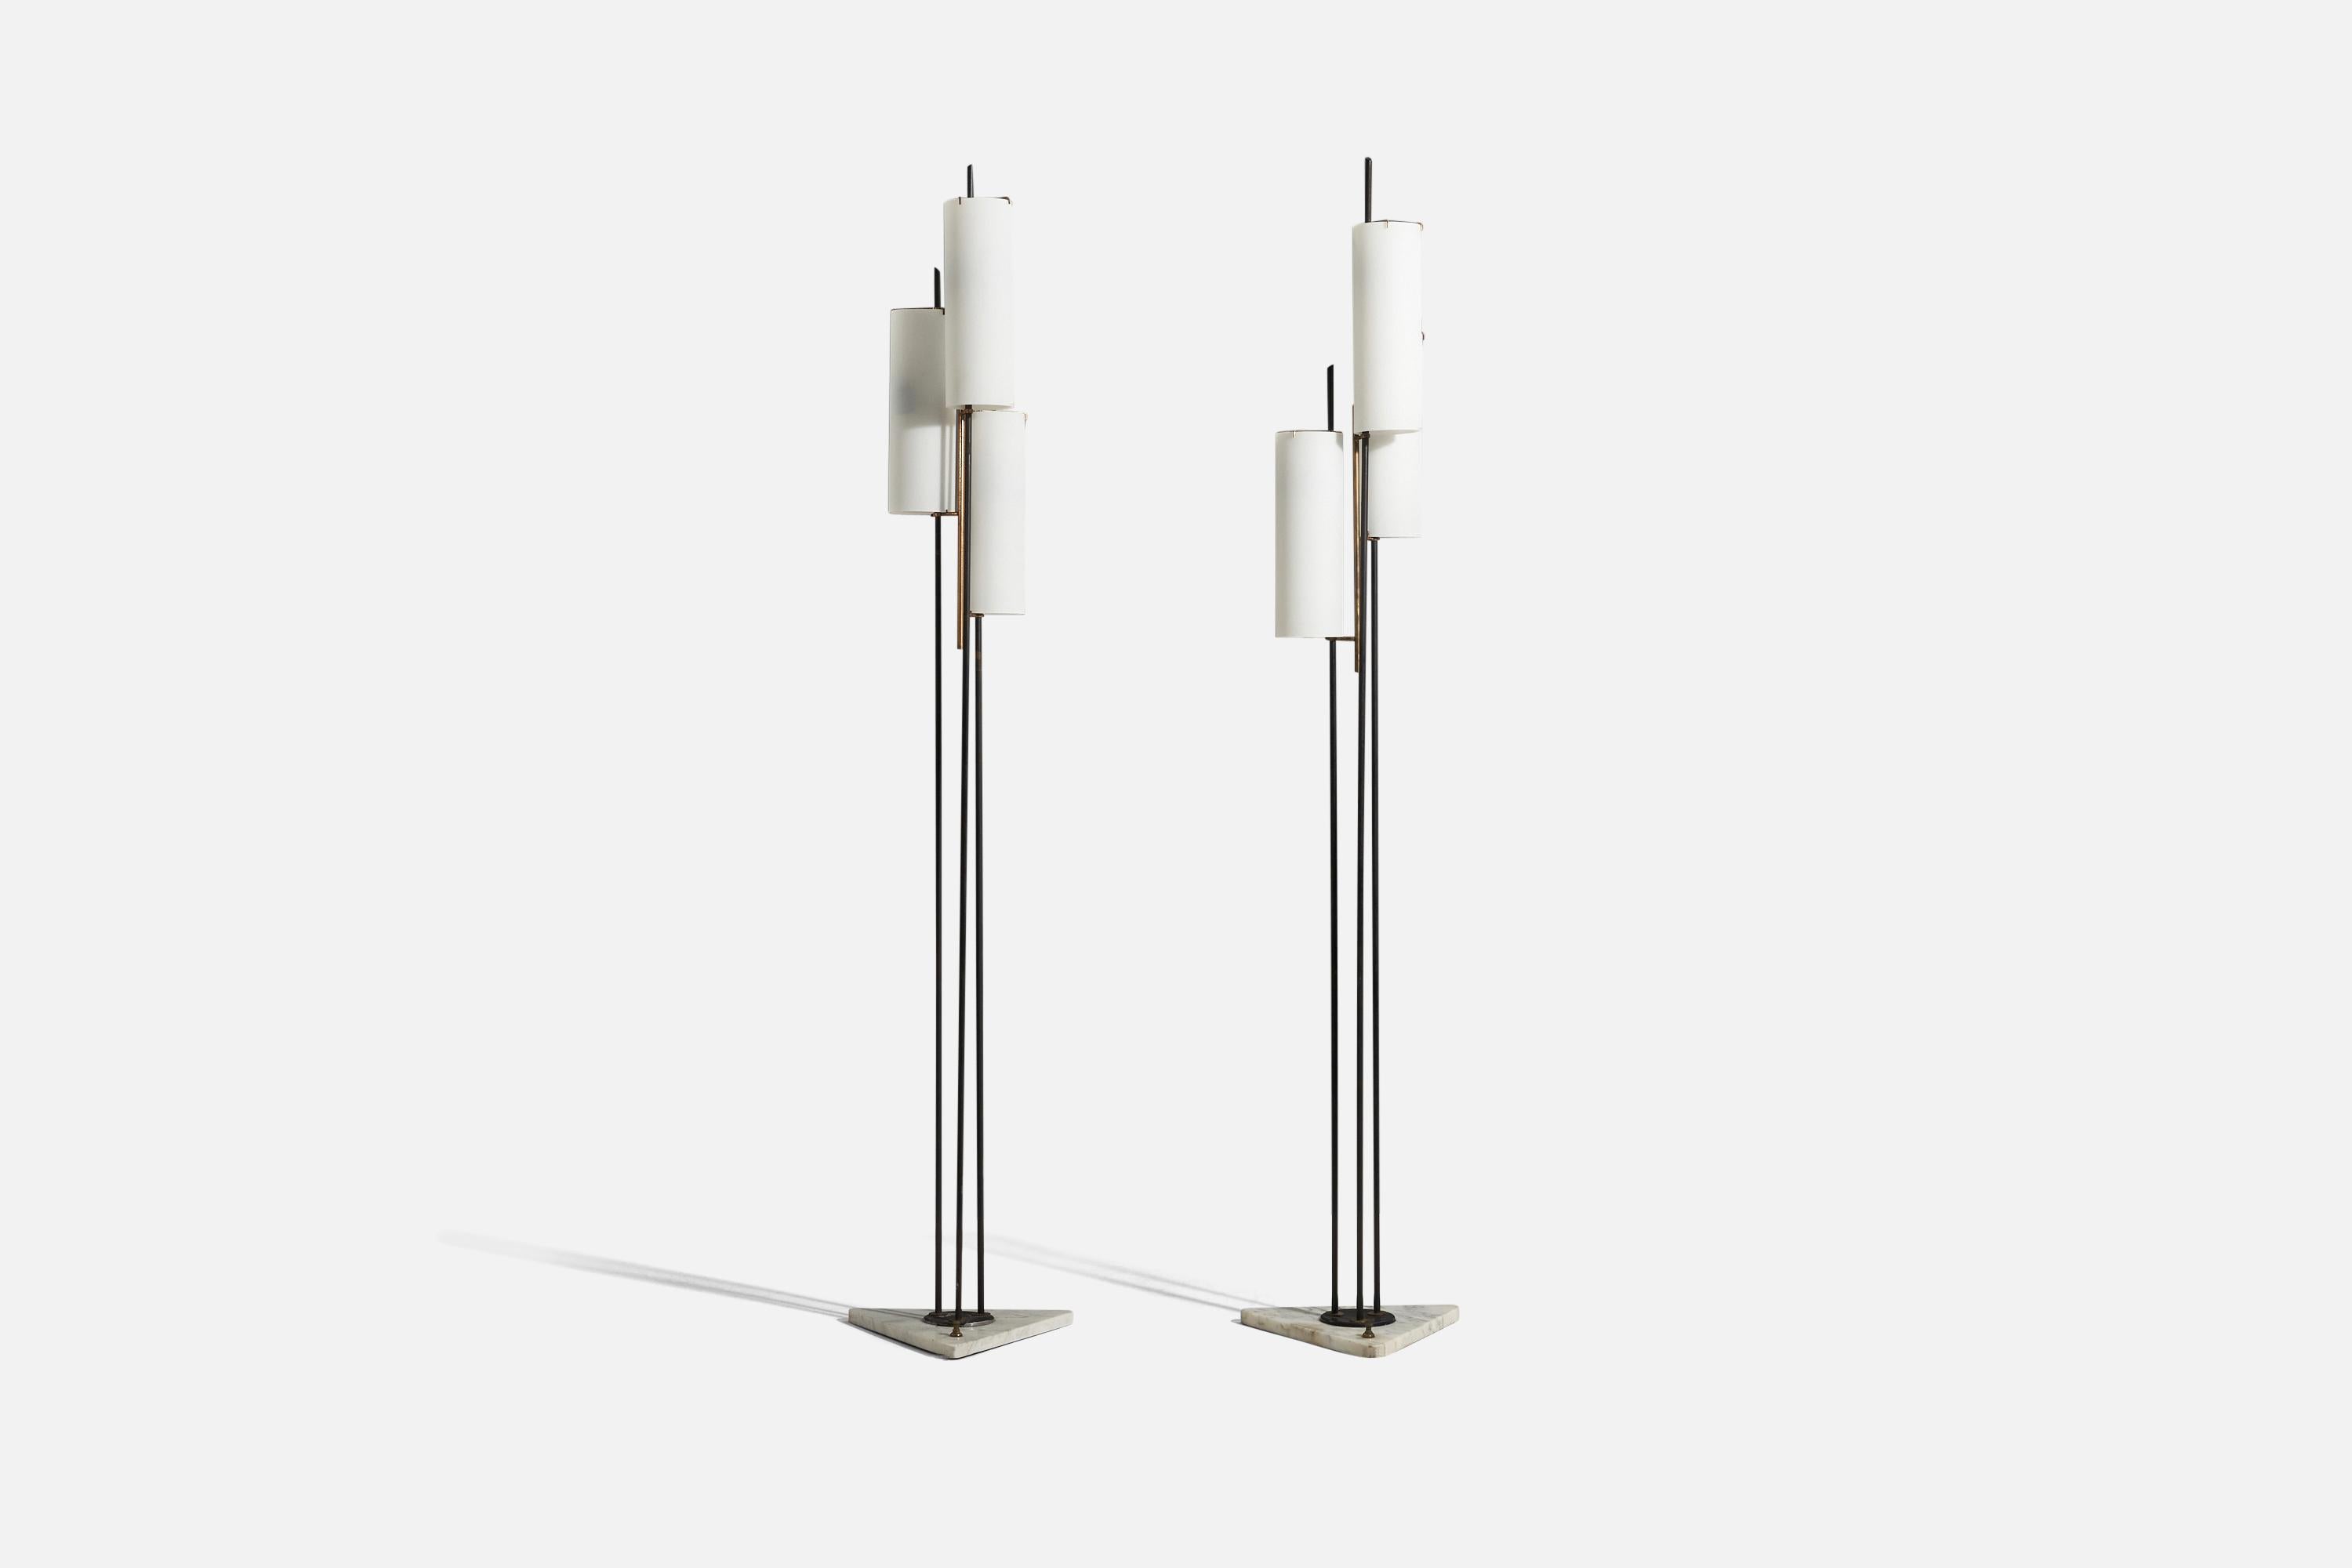 A pair of brass, glass, metal and marble floor lamps designed and produced in Italy, c. 1950s.

